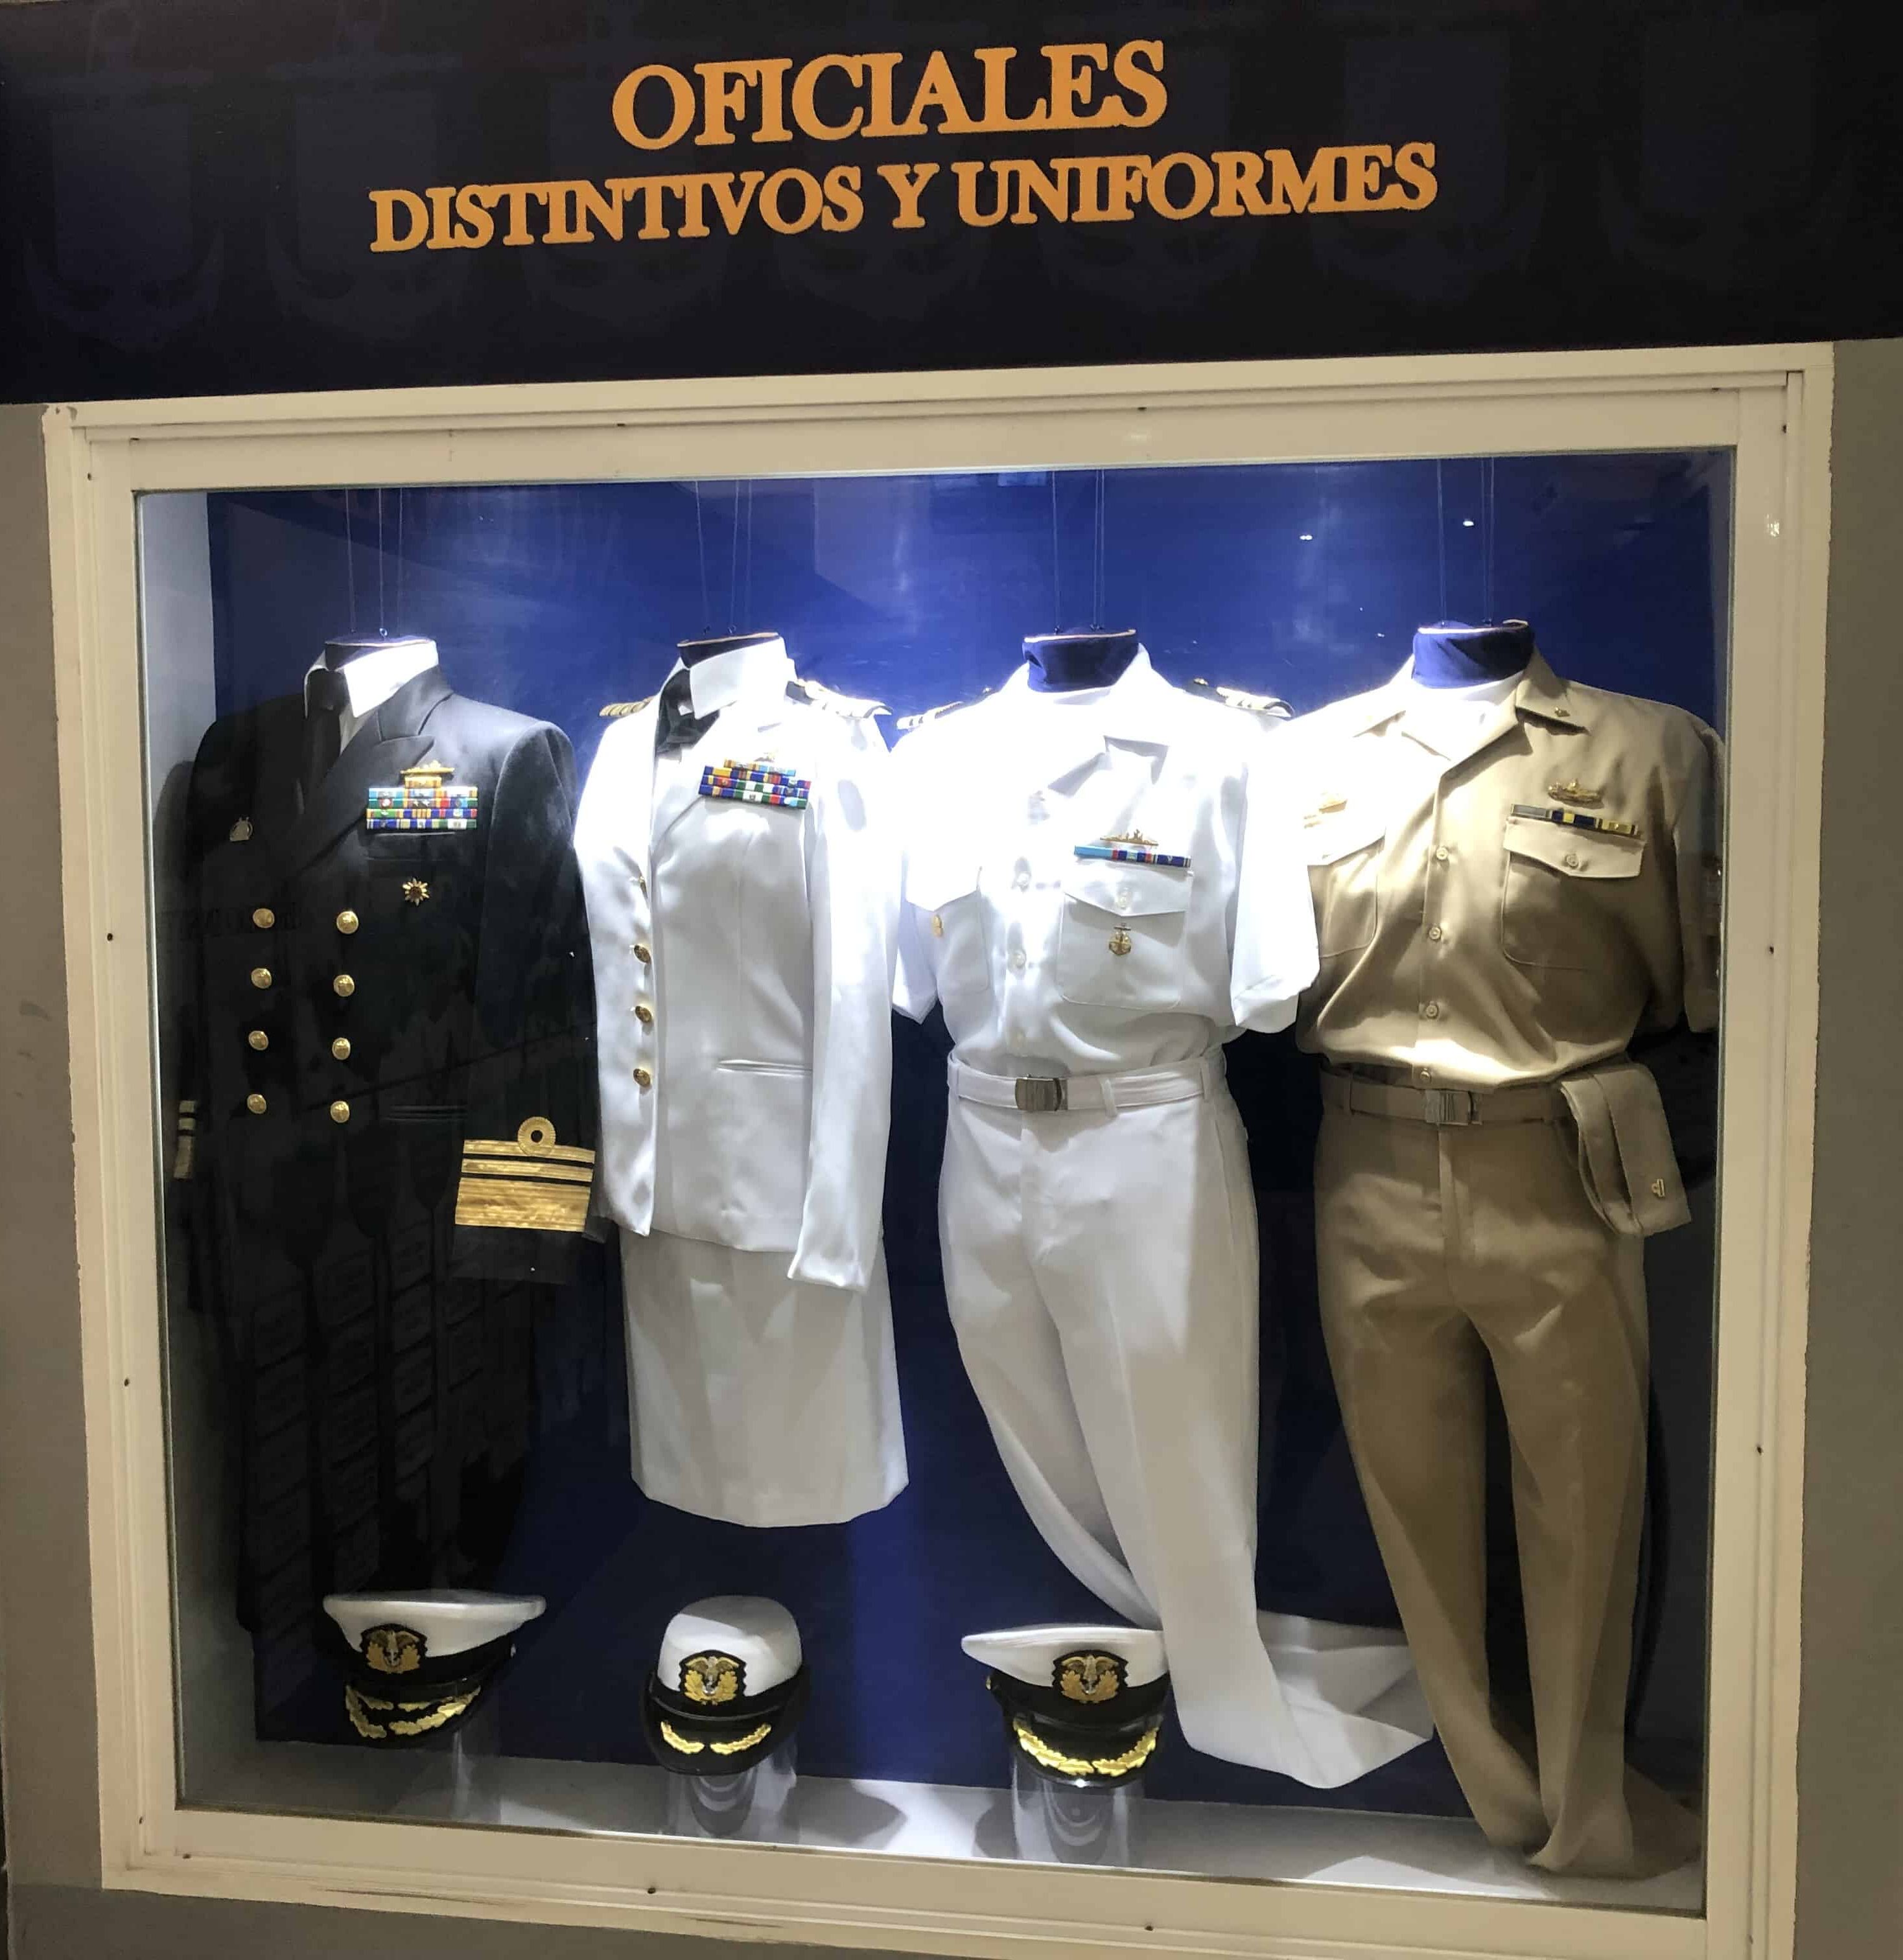 Colombian naval officer uniforms at the Caribbean Naval Museum in Cartagena, Colombia